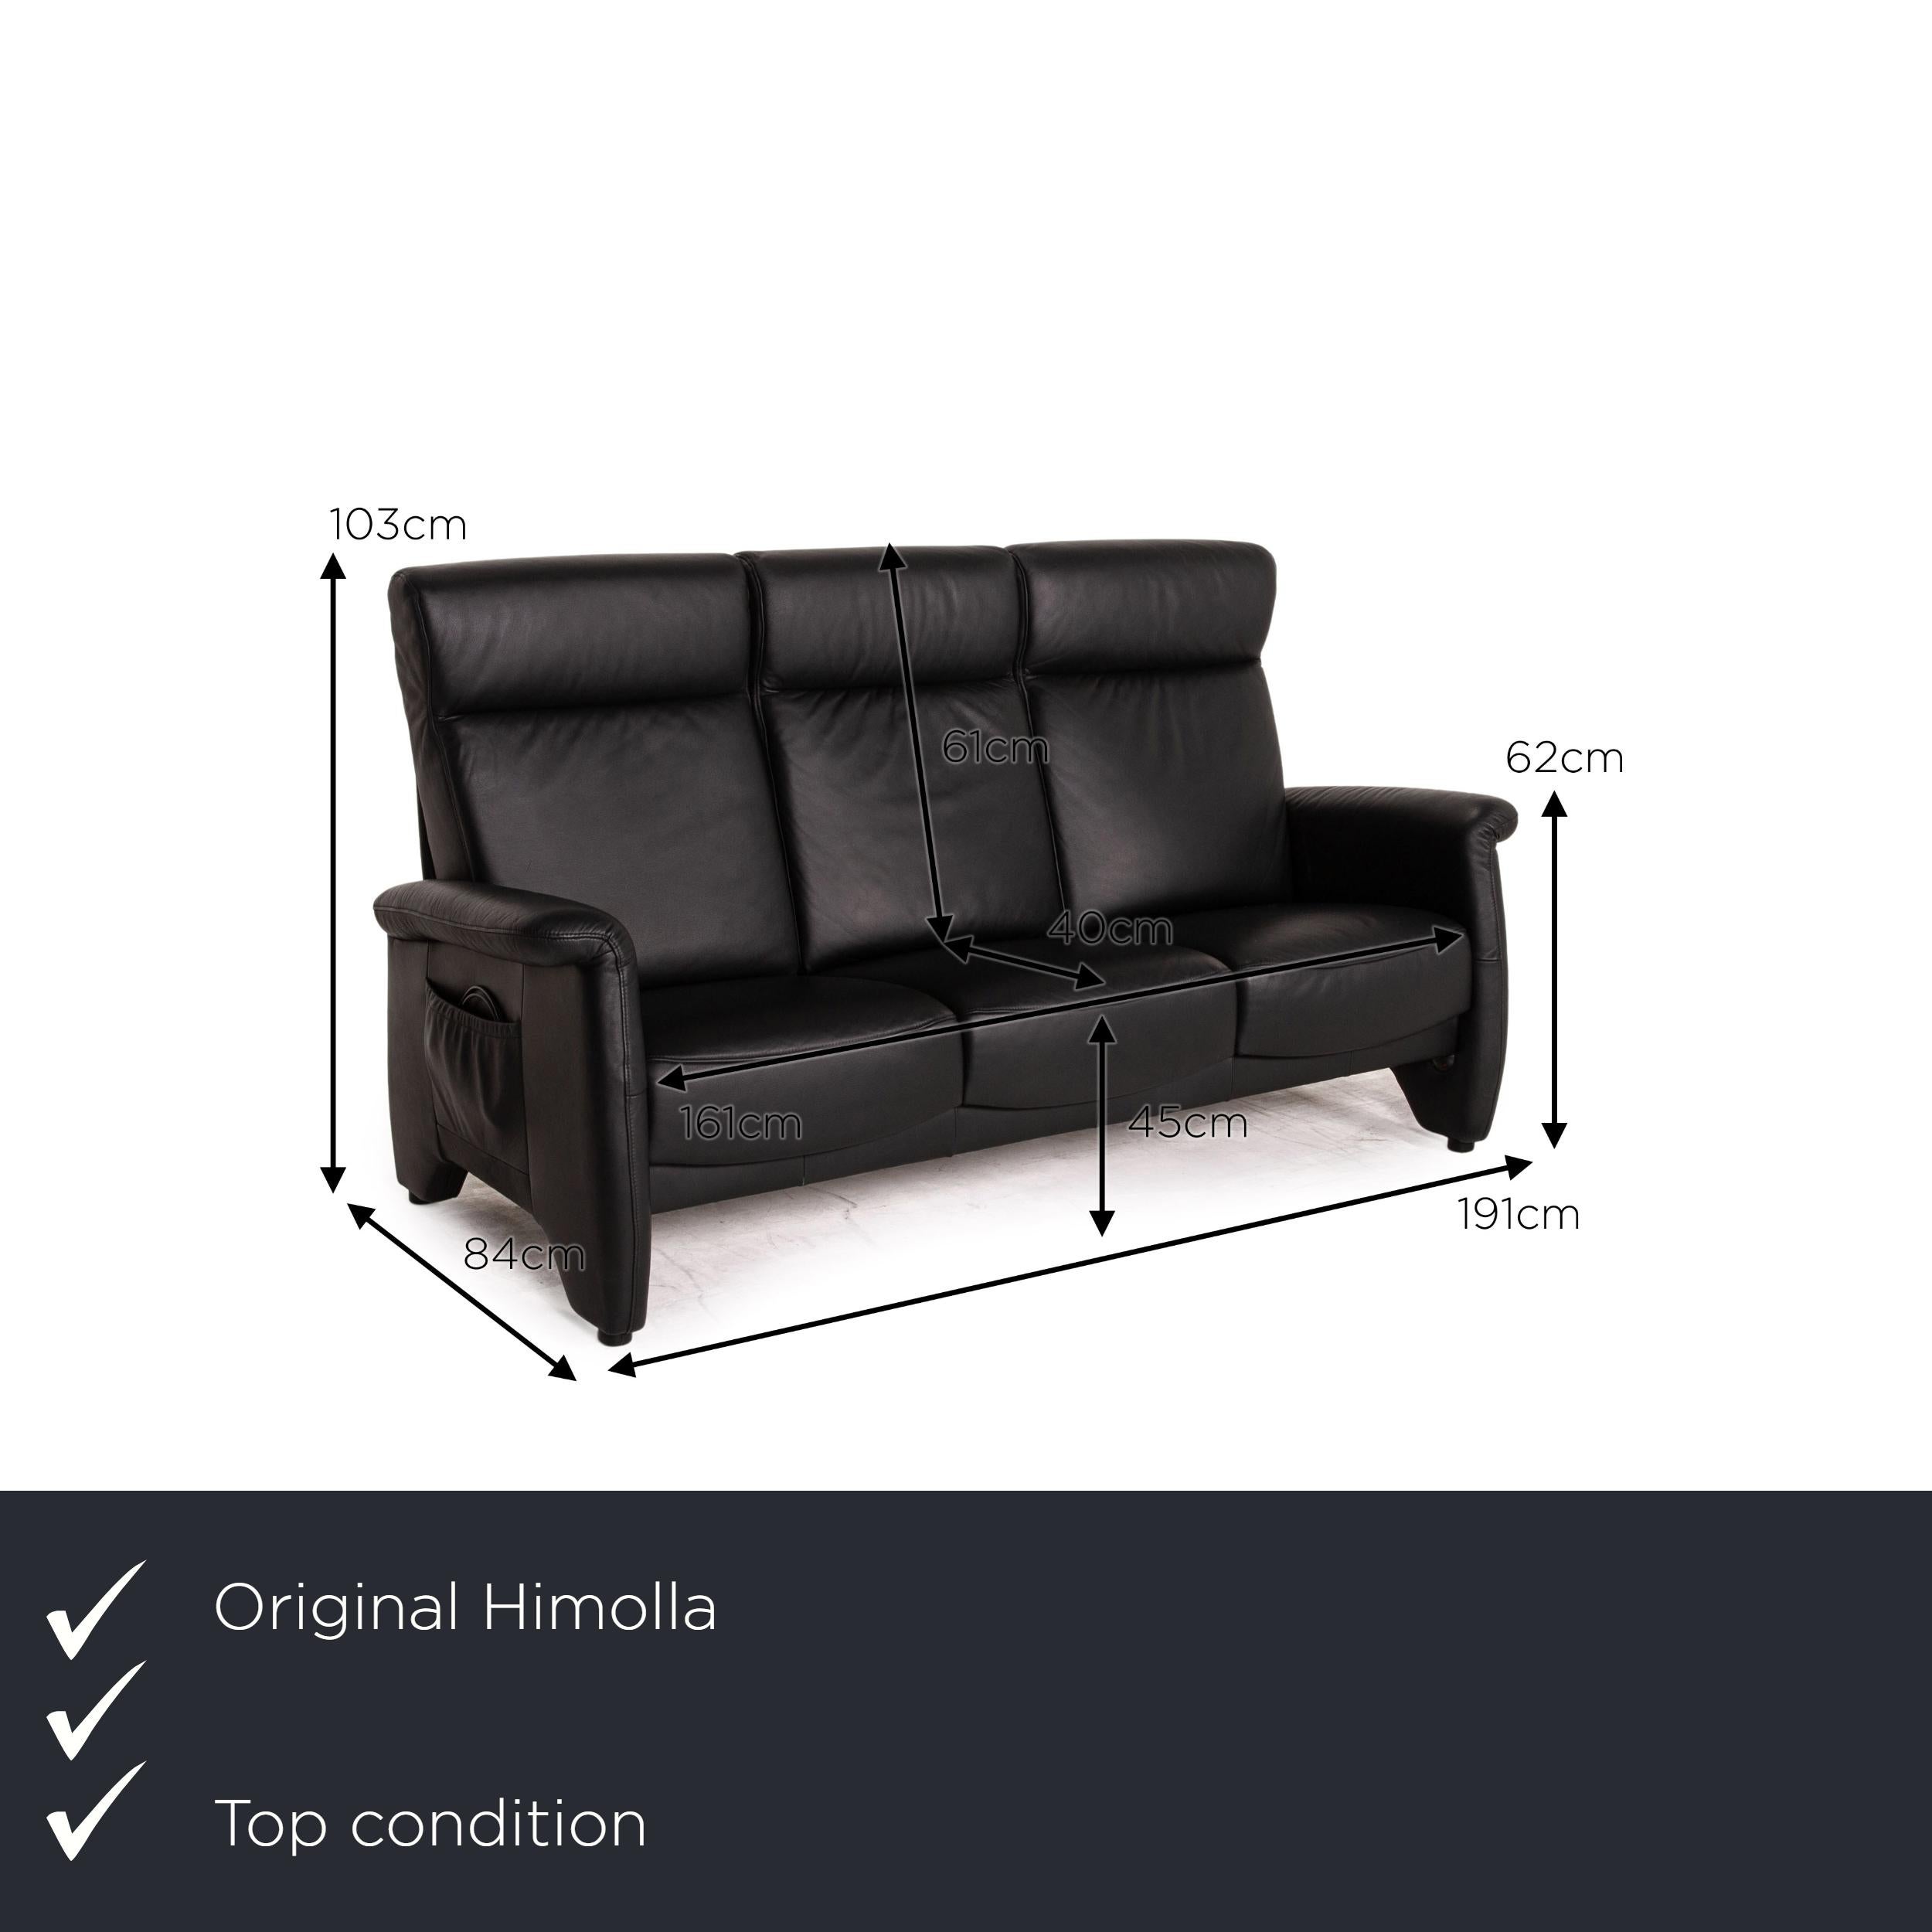 We present to you a Himolla Ergoline leather sofa black three seater function couch.

 
Product measurements in centimeters:
 

Depth: 84
Width: 191
Height: 103
Seat height: 45
Rest height: 62
Seat depth: 40
Seat width: 161
Back height: